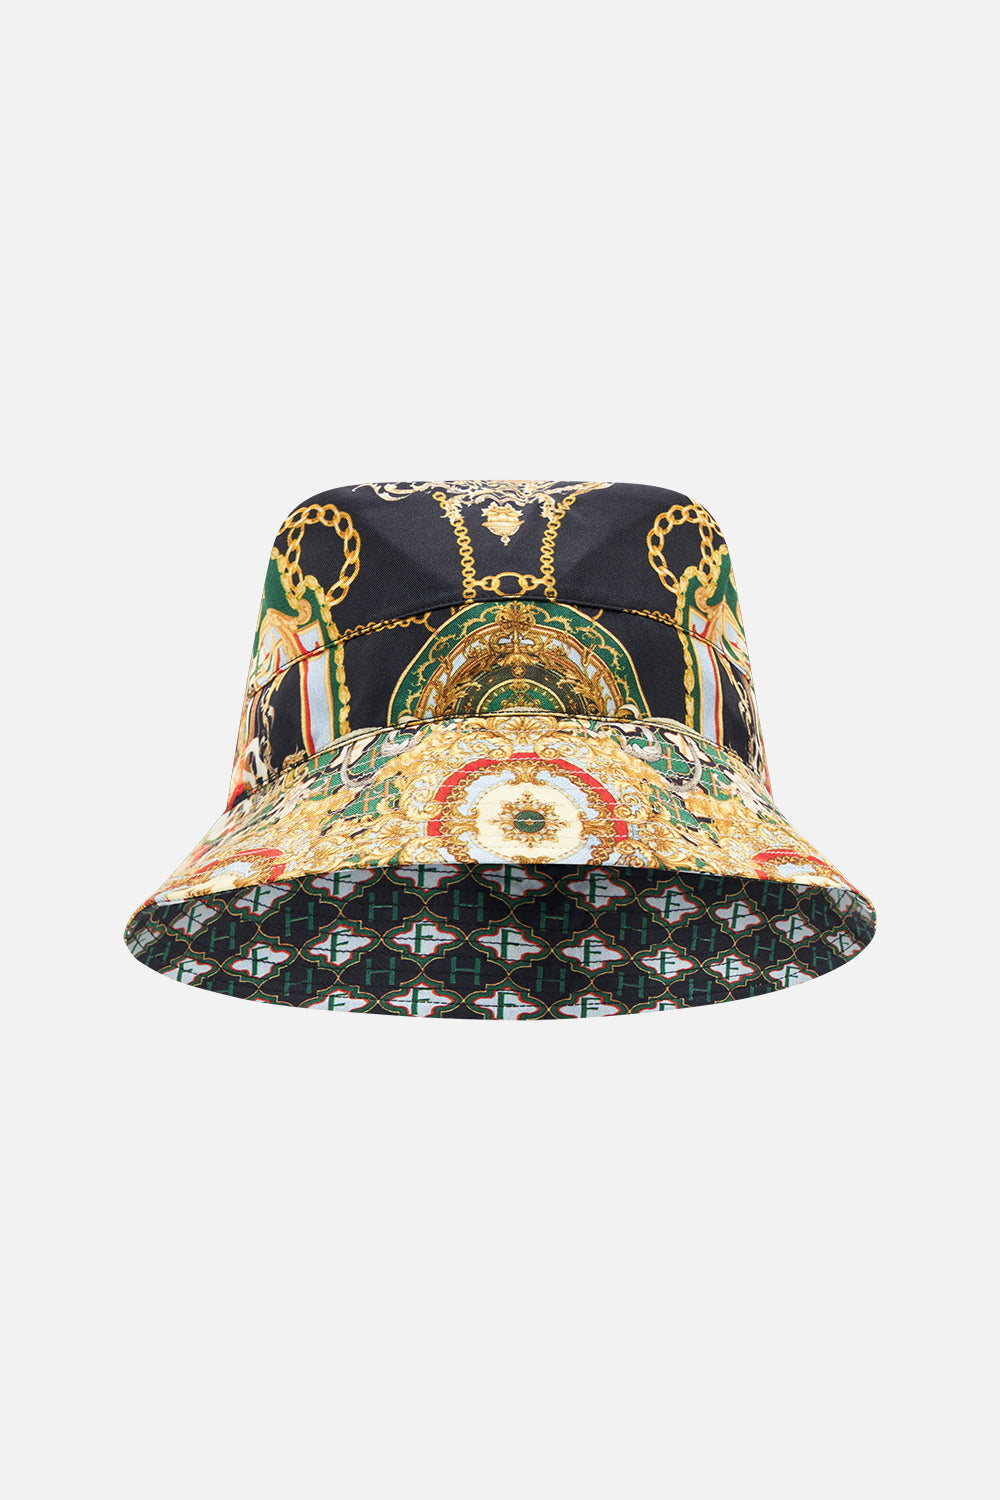 Product view of Hotel Franks By CAMILLA mens reversible bucket hat in Jealousy And Jewels print